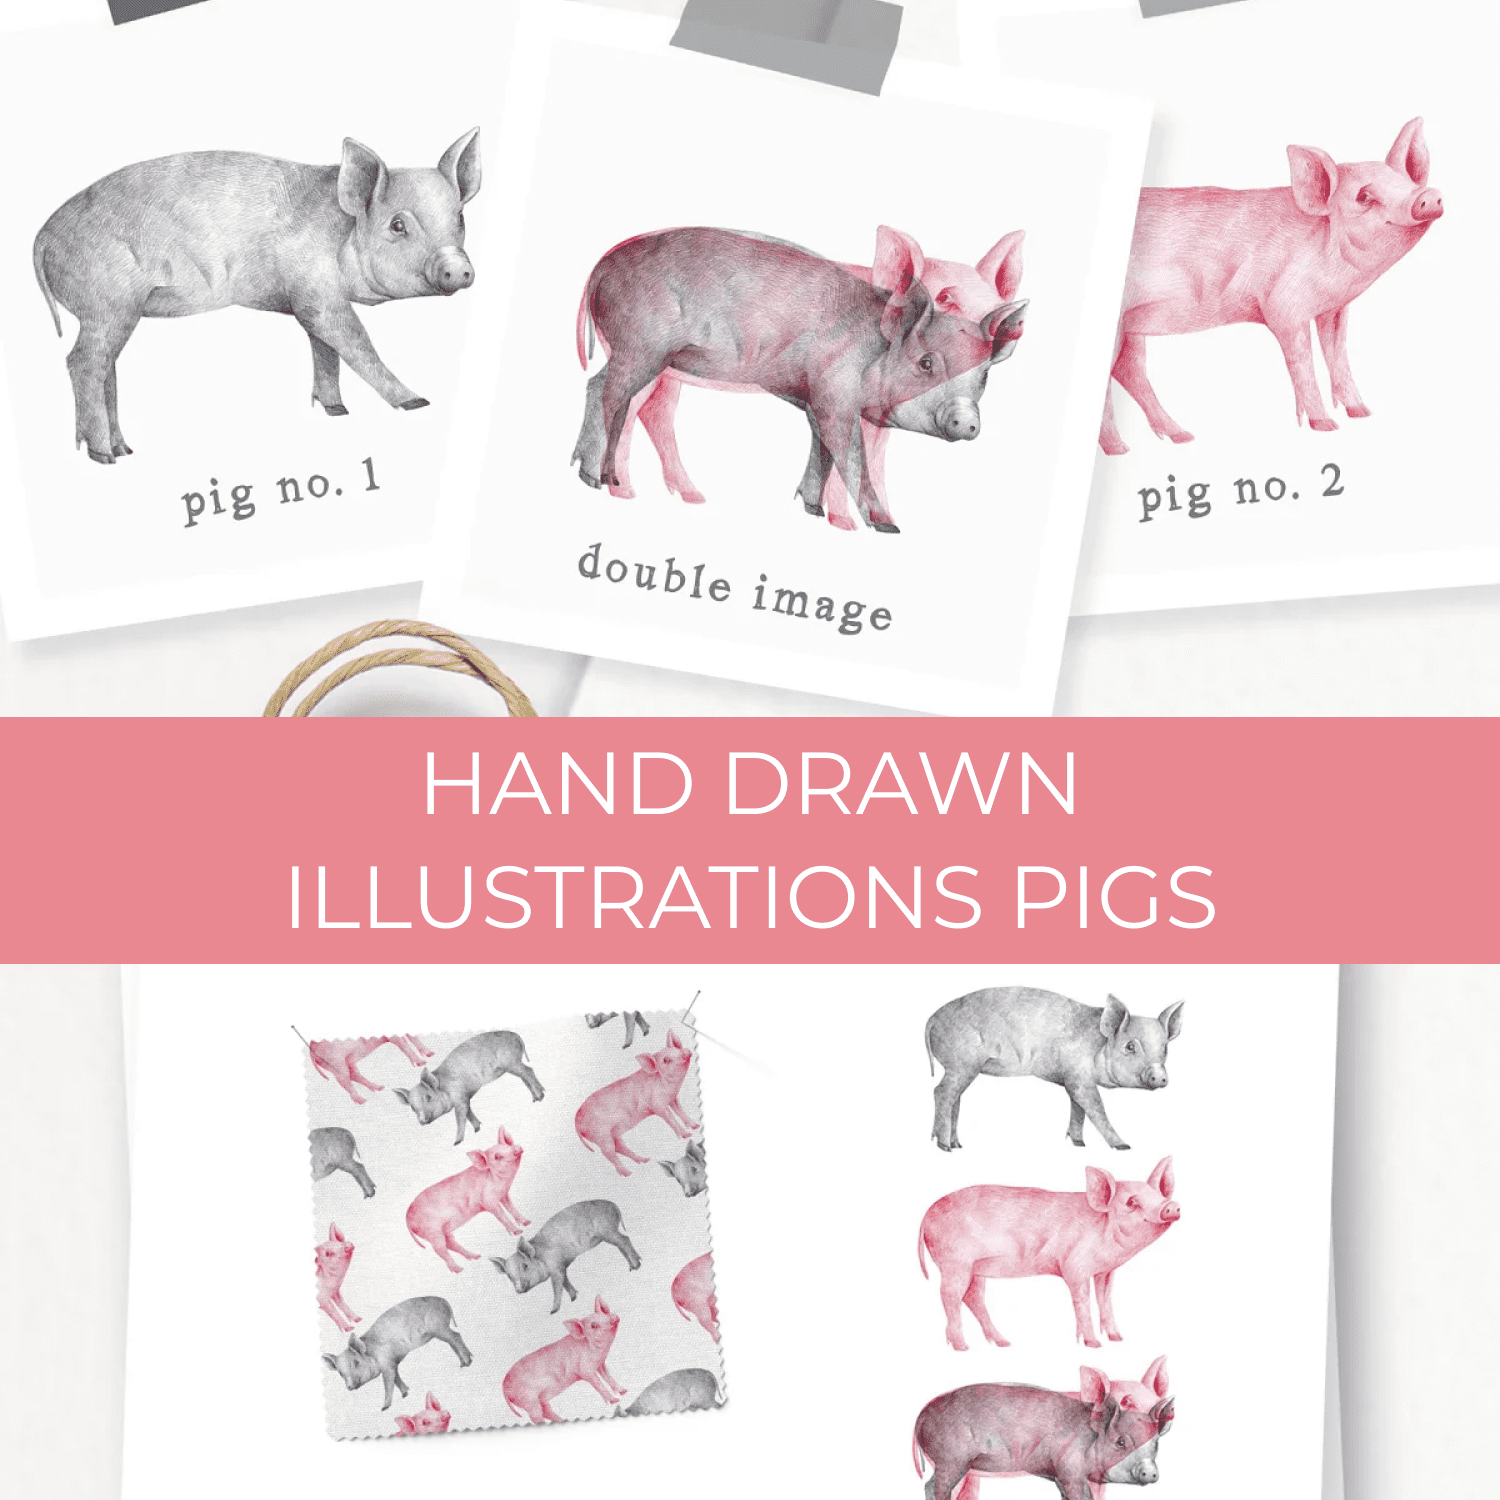 Hand drawn Illustrations Pigs cover.